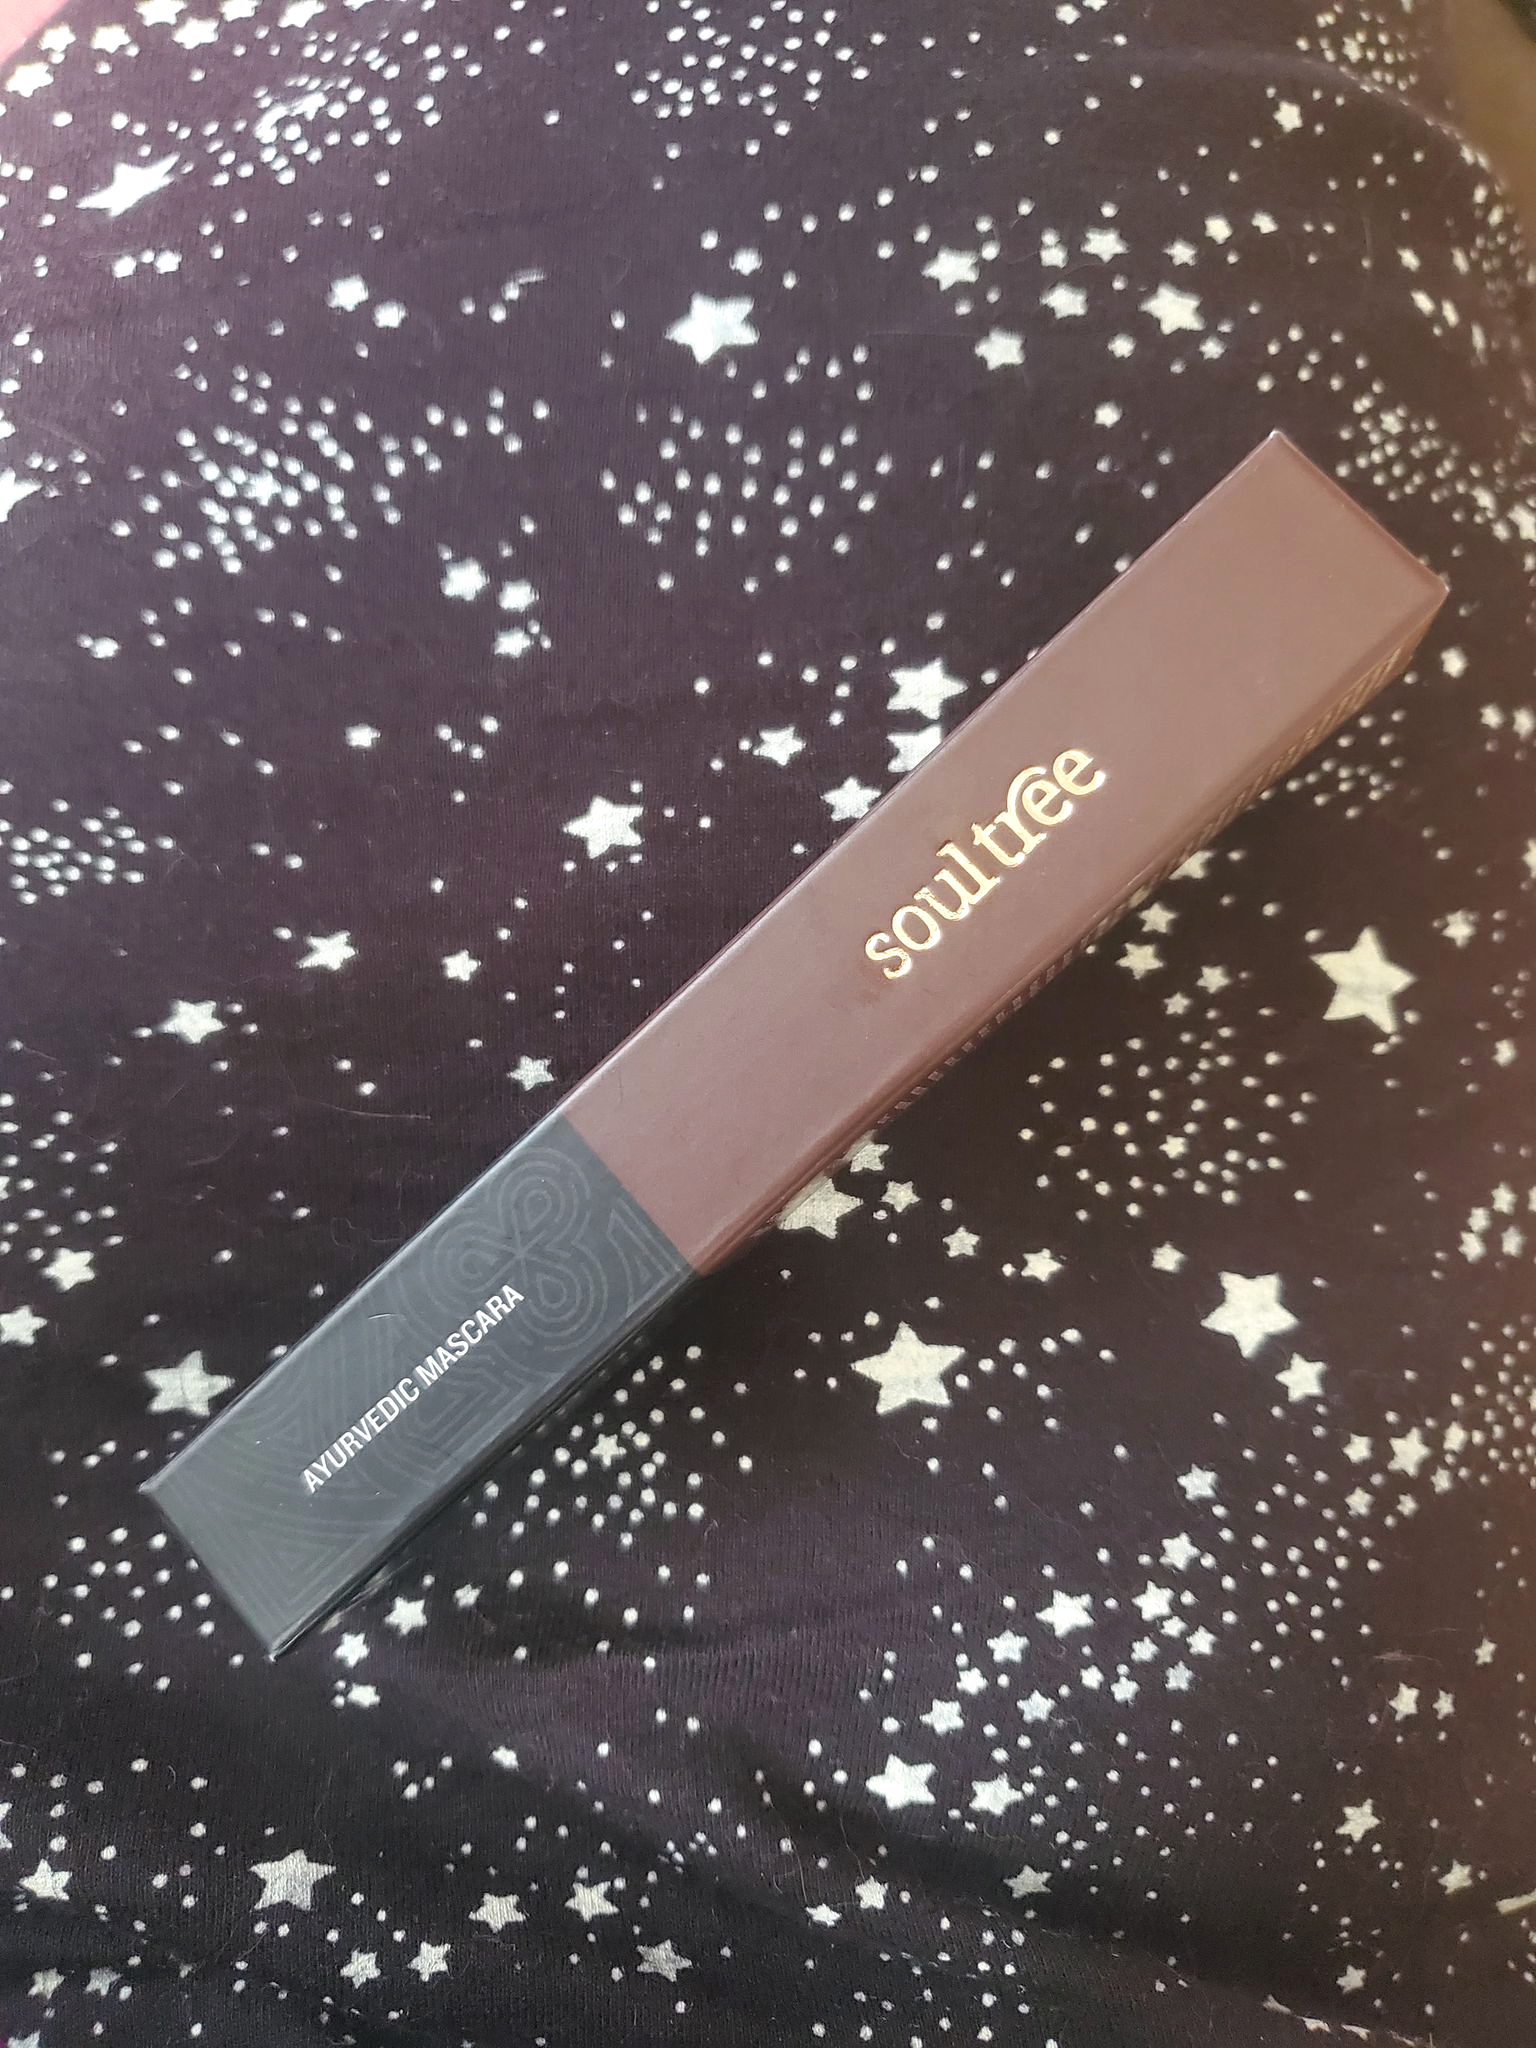 Pure Black mascara from SoulTree on dark starry background